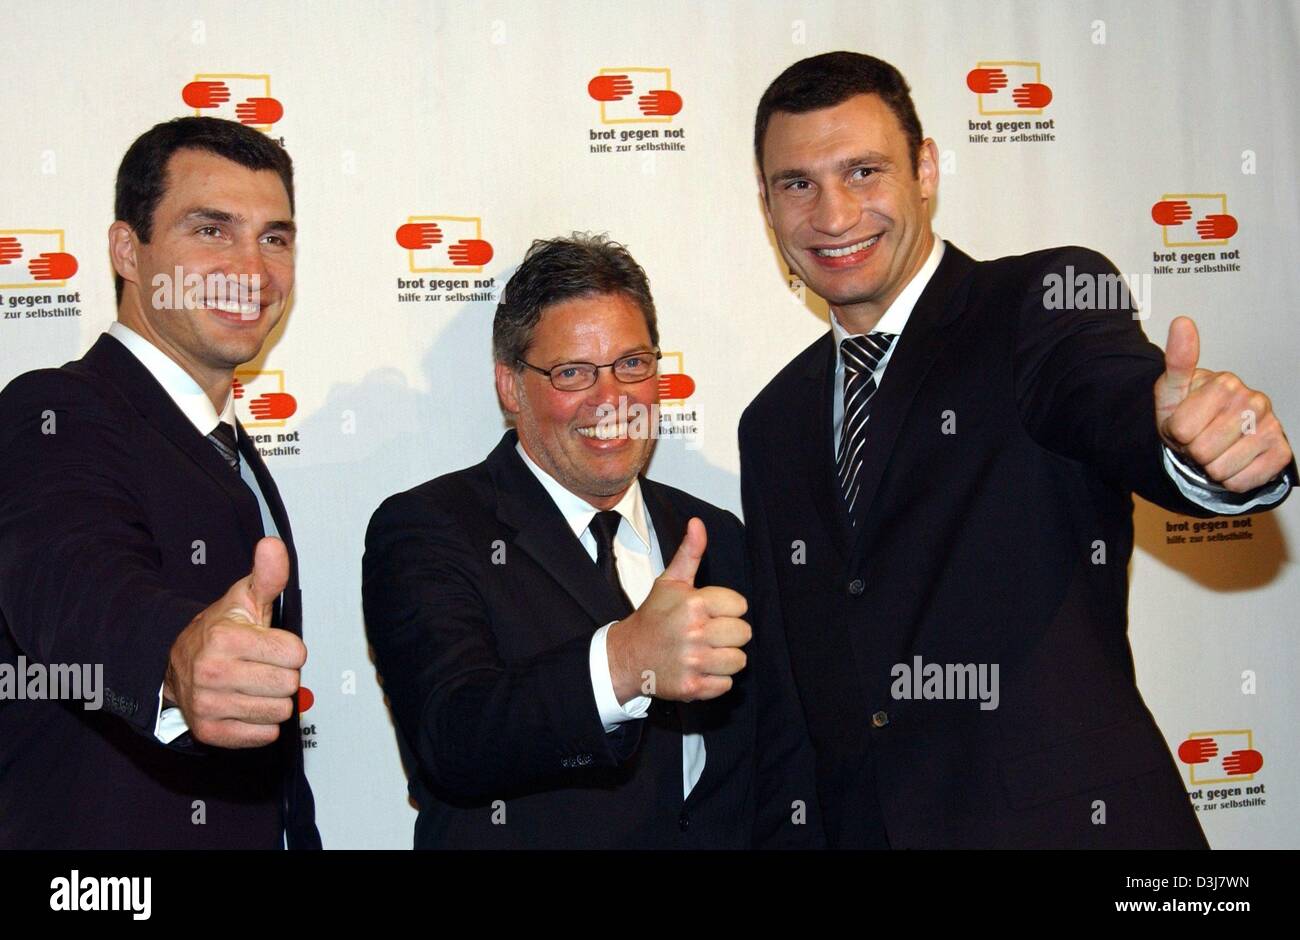 (dpa) - German bakery entrepreneur Heiner Kamps (C) is flanked by the two boxing pros, Wladimir (L) and Vitali Klitschko, during the charity gala of the 'Brot gegen Not' (bread against poverty) foundation in Duesseldorf, Germany, 14 May 2004. 'Brot gegen Not' was founded by Kamps in 2000 and funds teenagers in need in Third World countries. Stock Photo